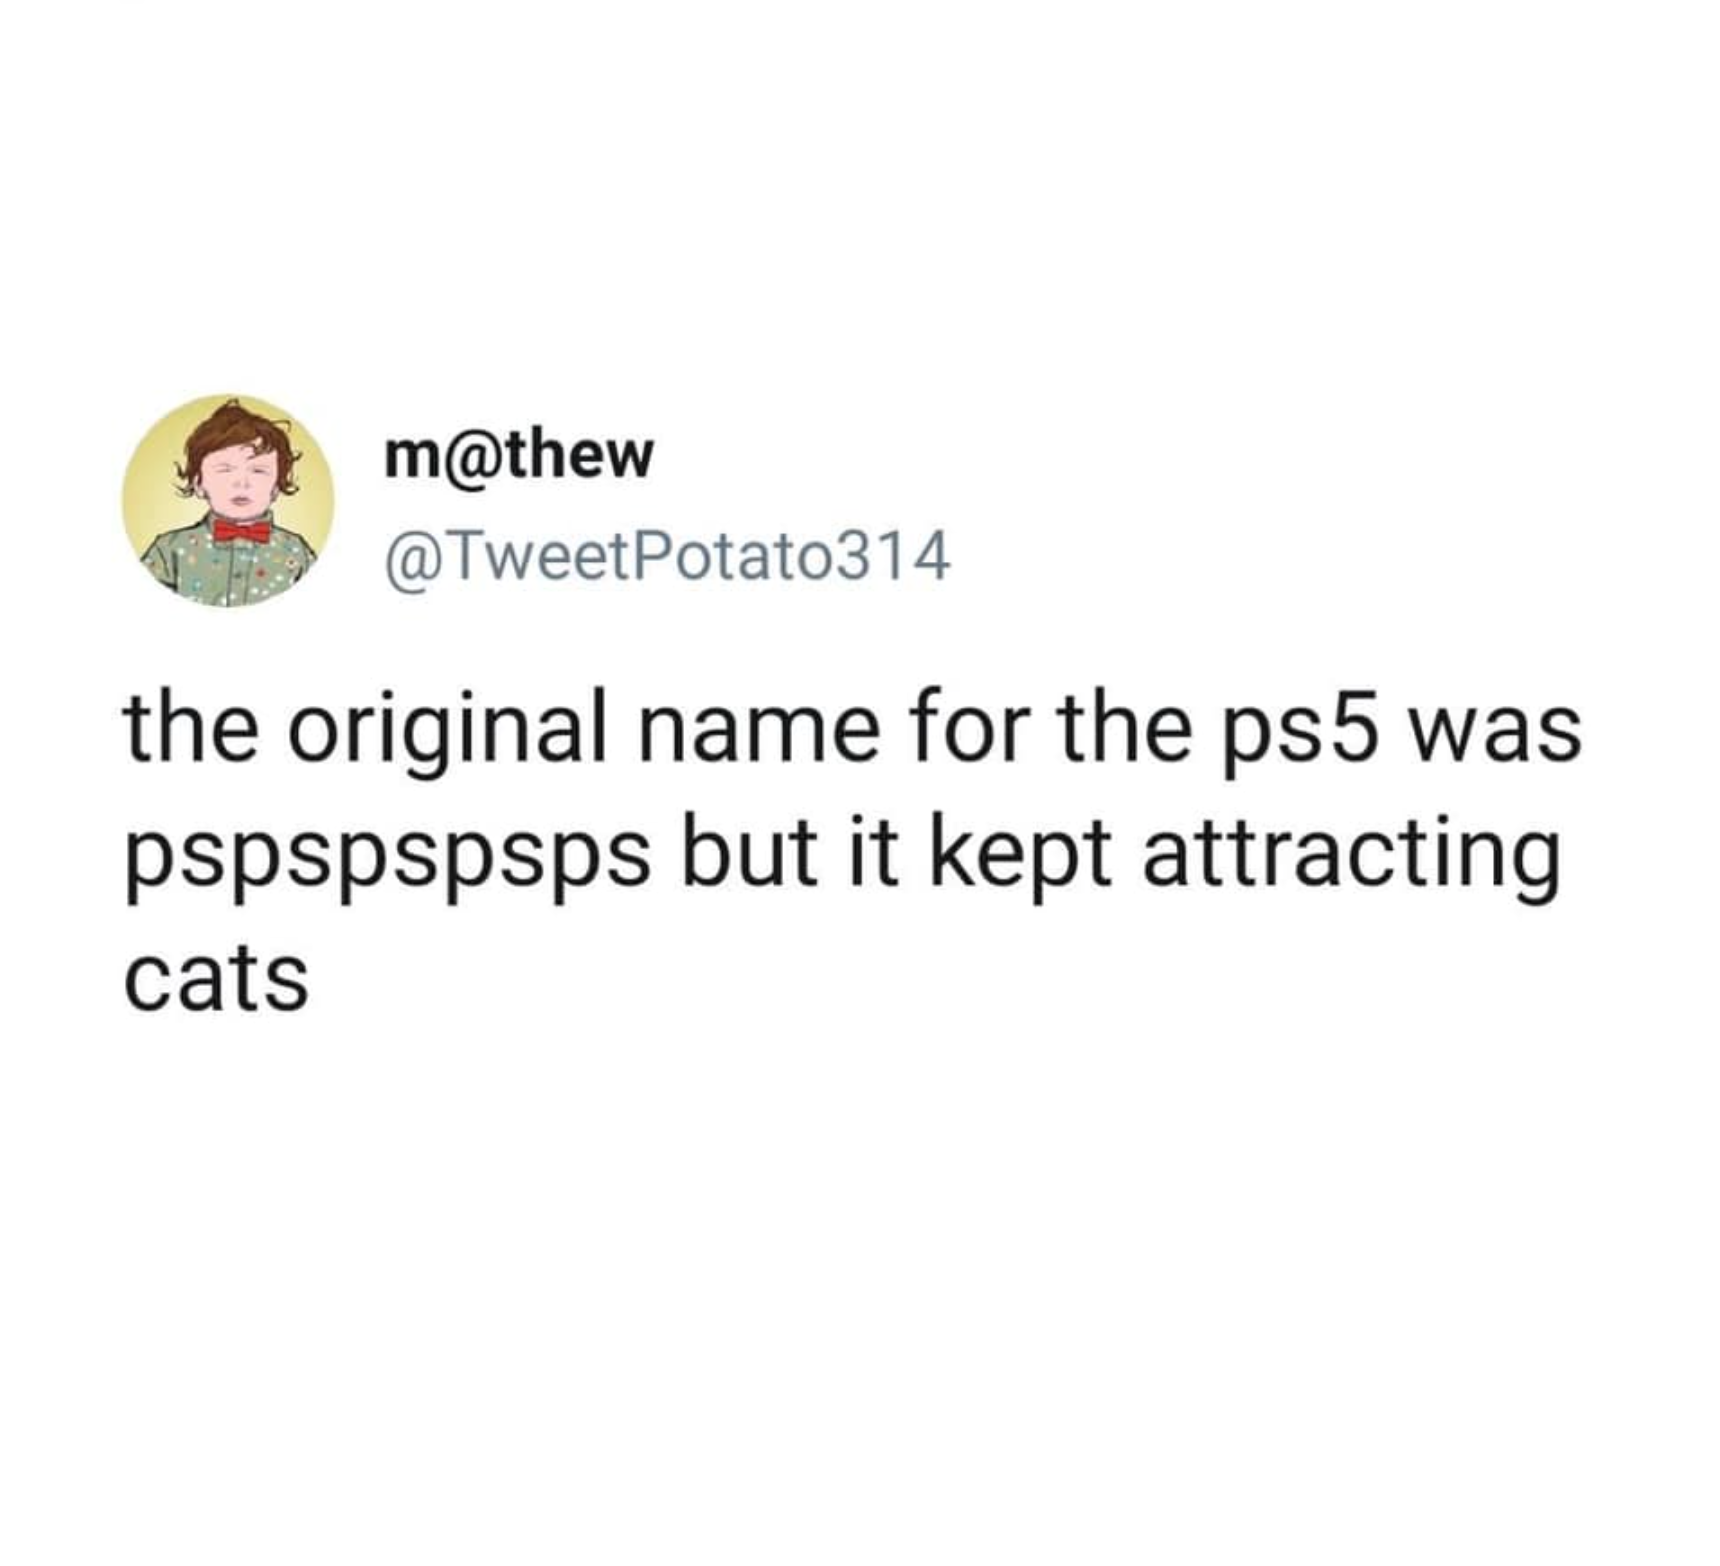 m Potato314 the original name for the ps5 was pspspspsps but it kept attracting cats